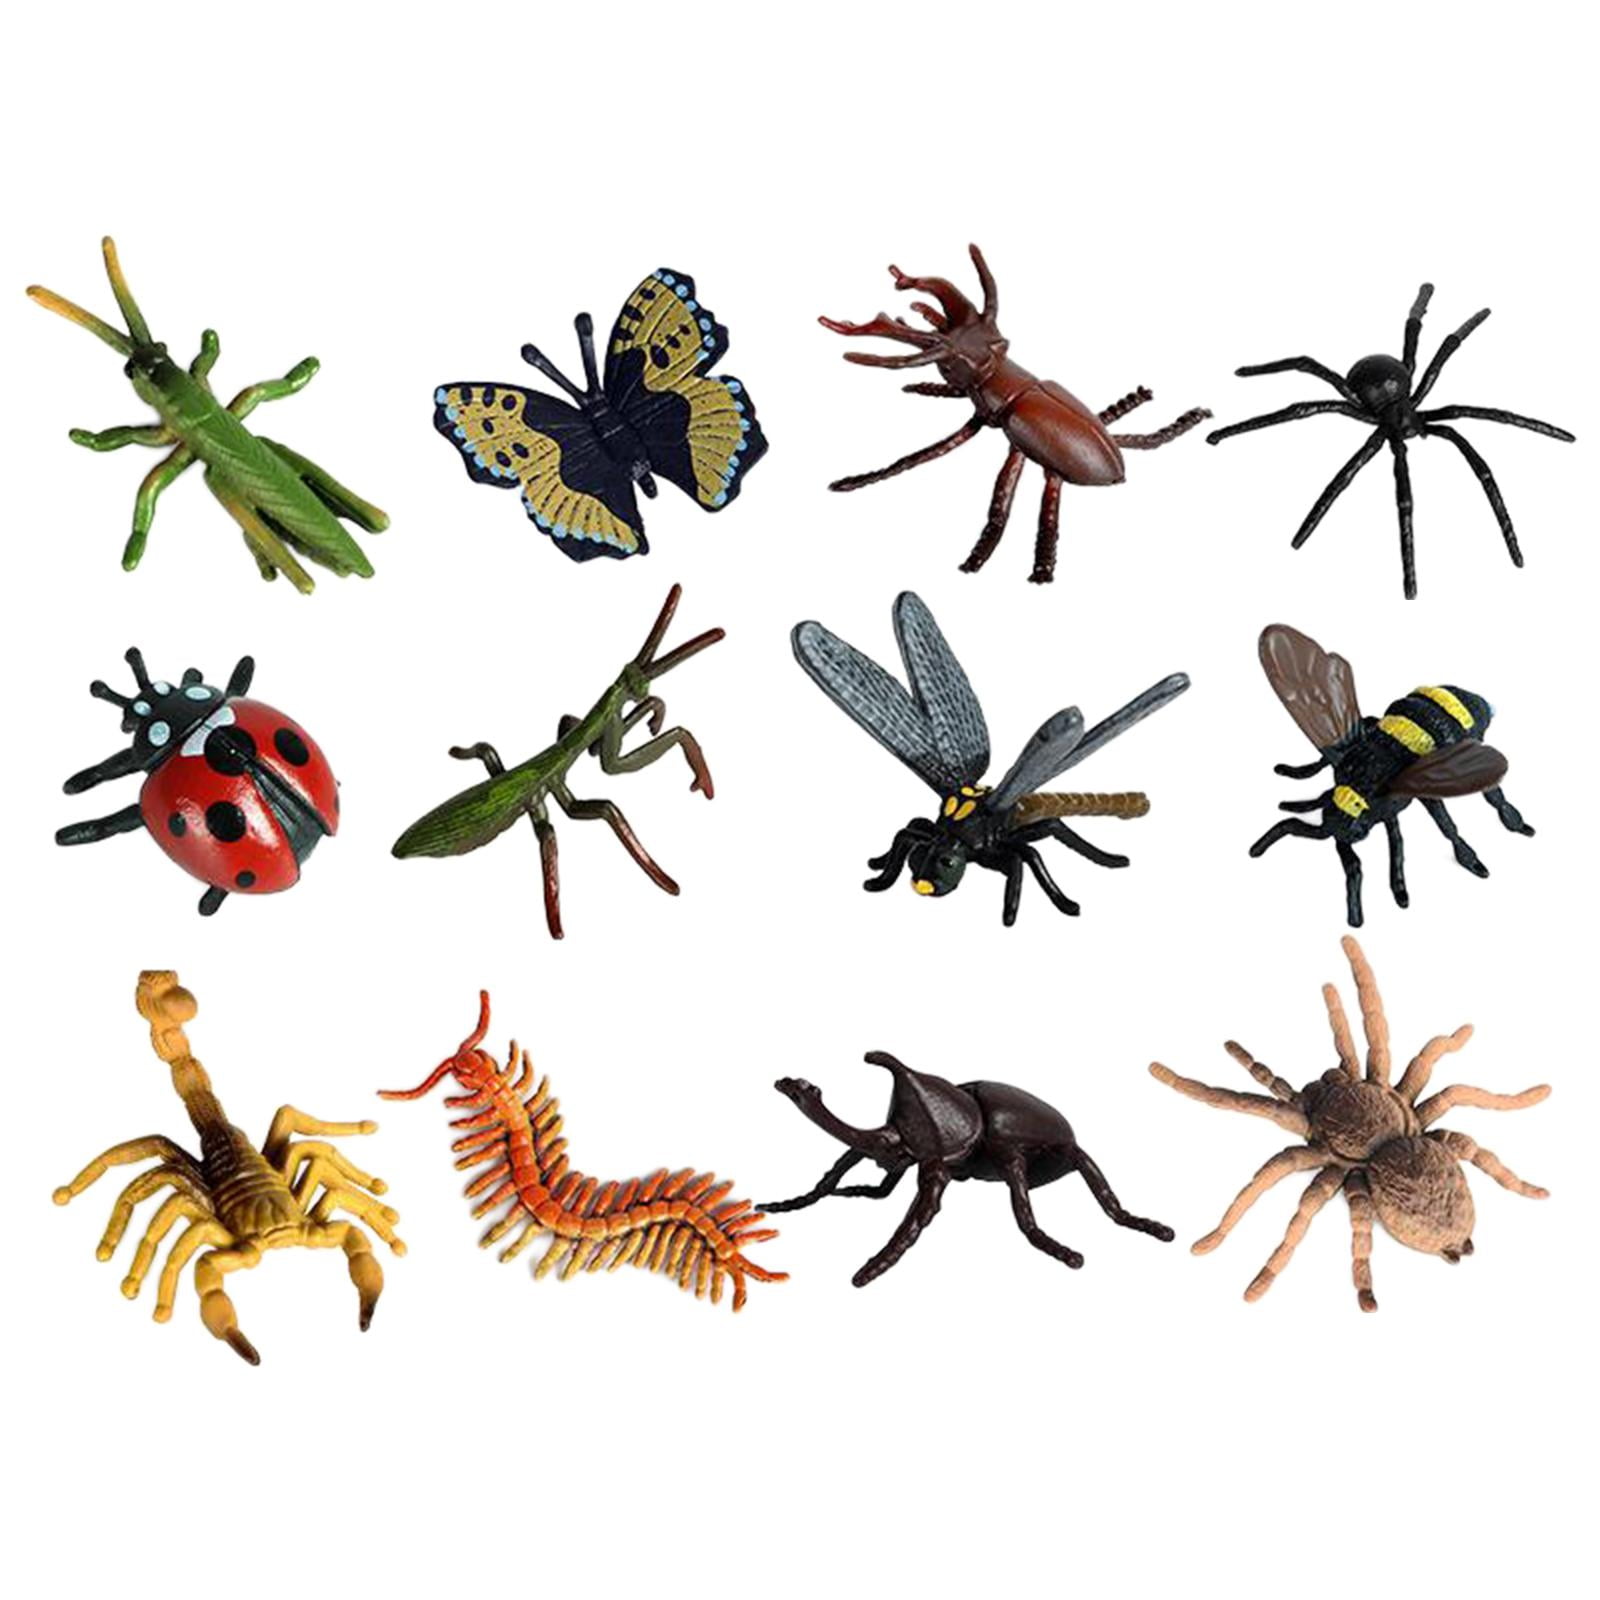 12pcs Plastic Insect Model Figures Toys Bugs Scorpion Bee Jungle Decors Gift kid 